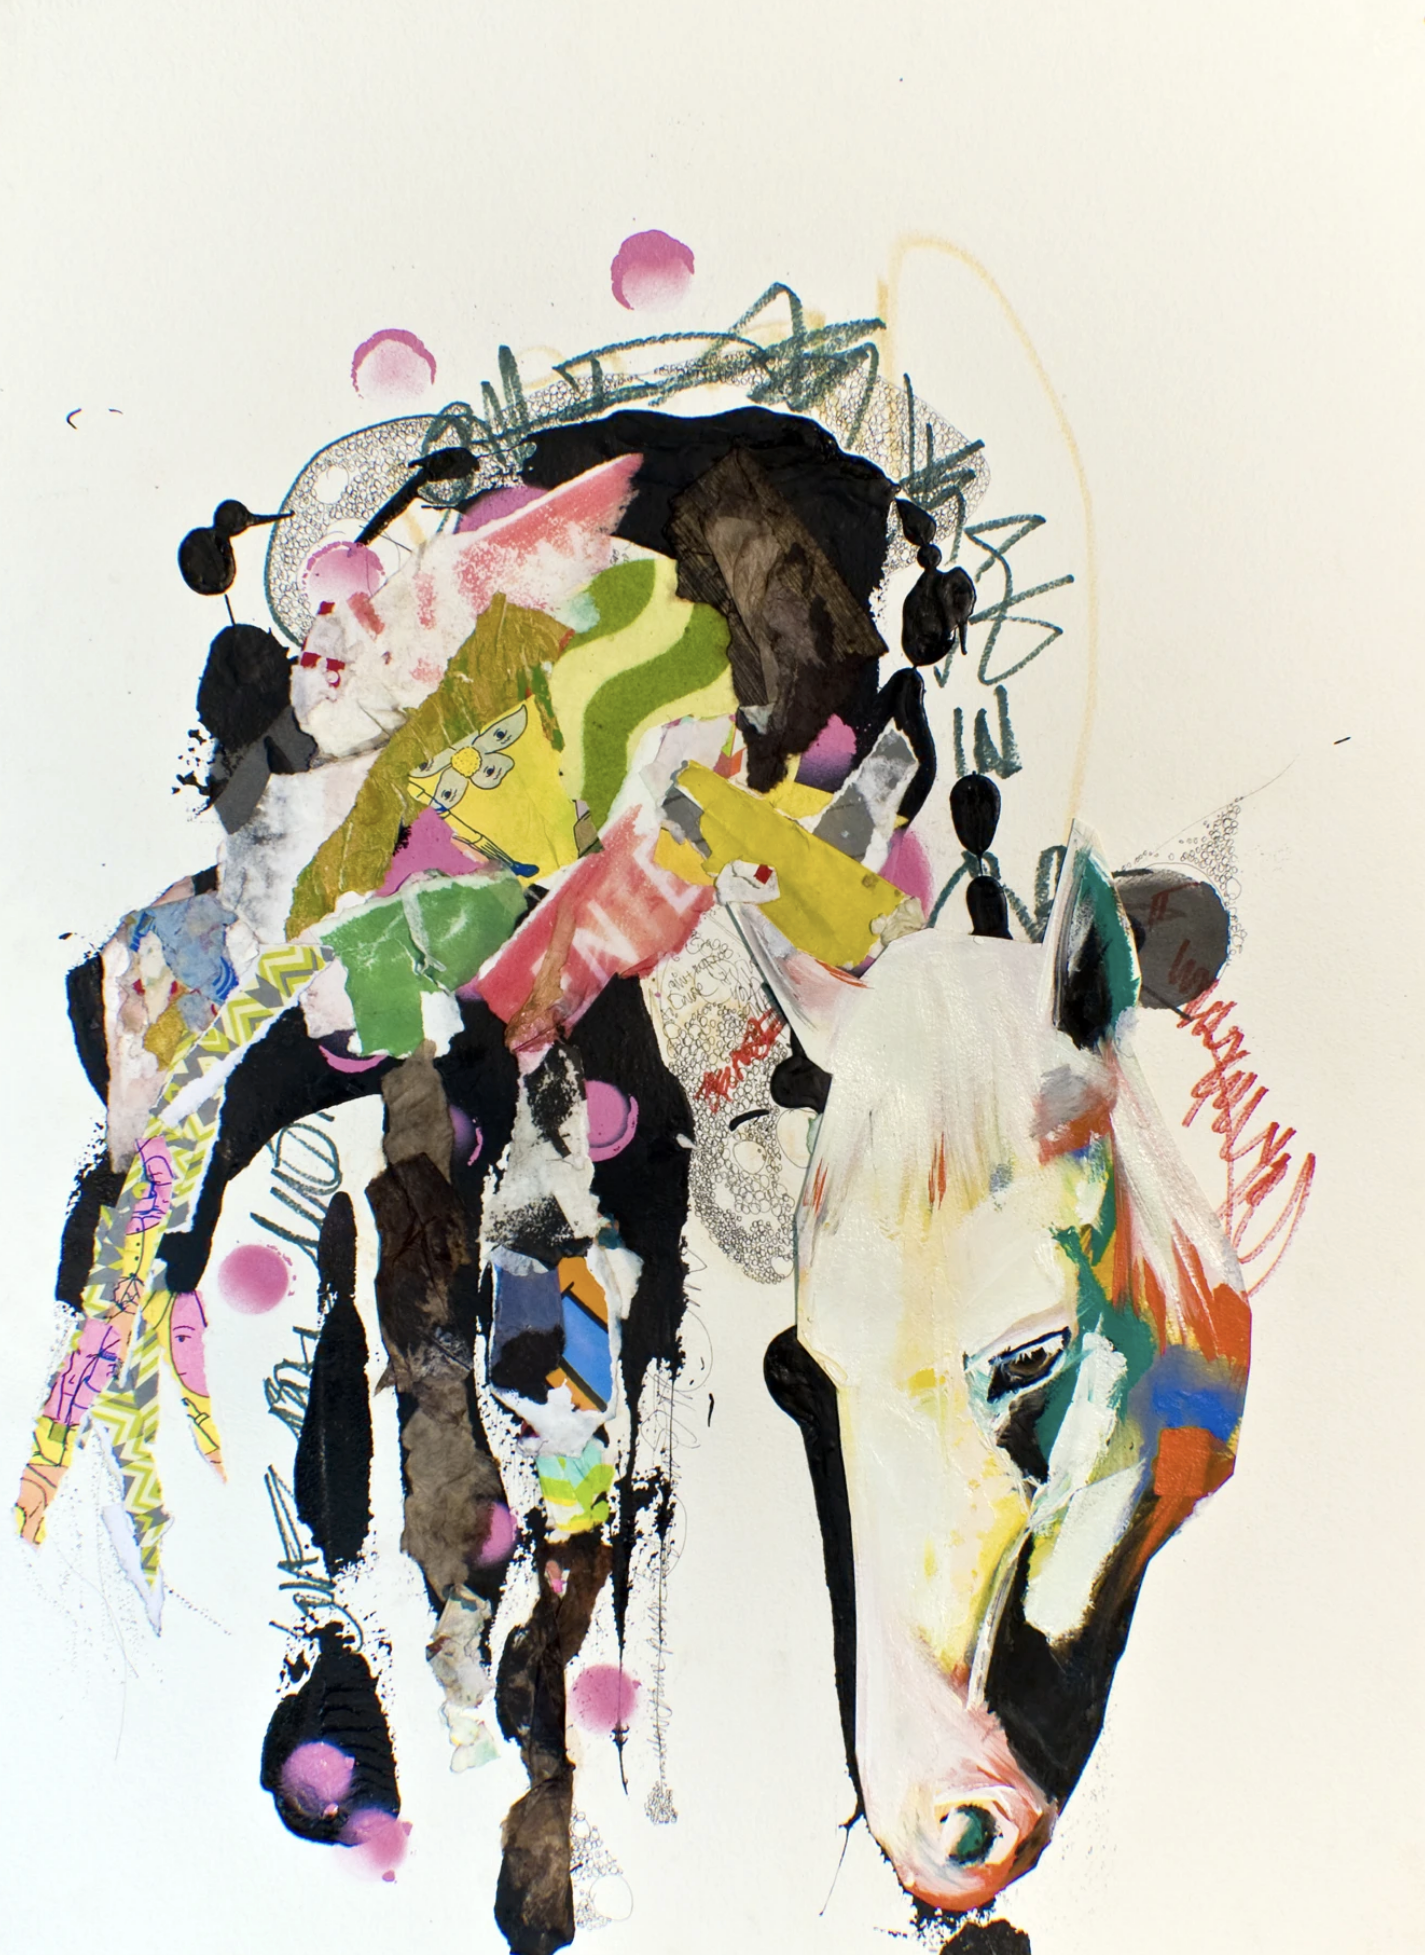 My Little Pony 2013 (22.5'x30.5') Mixed Media Collage and Oil on archival paper.